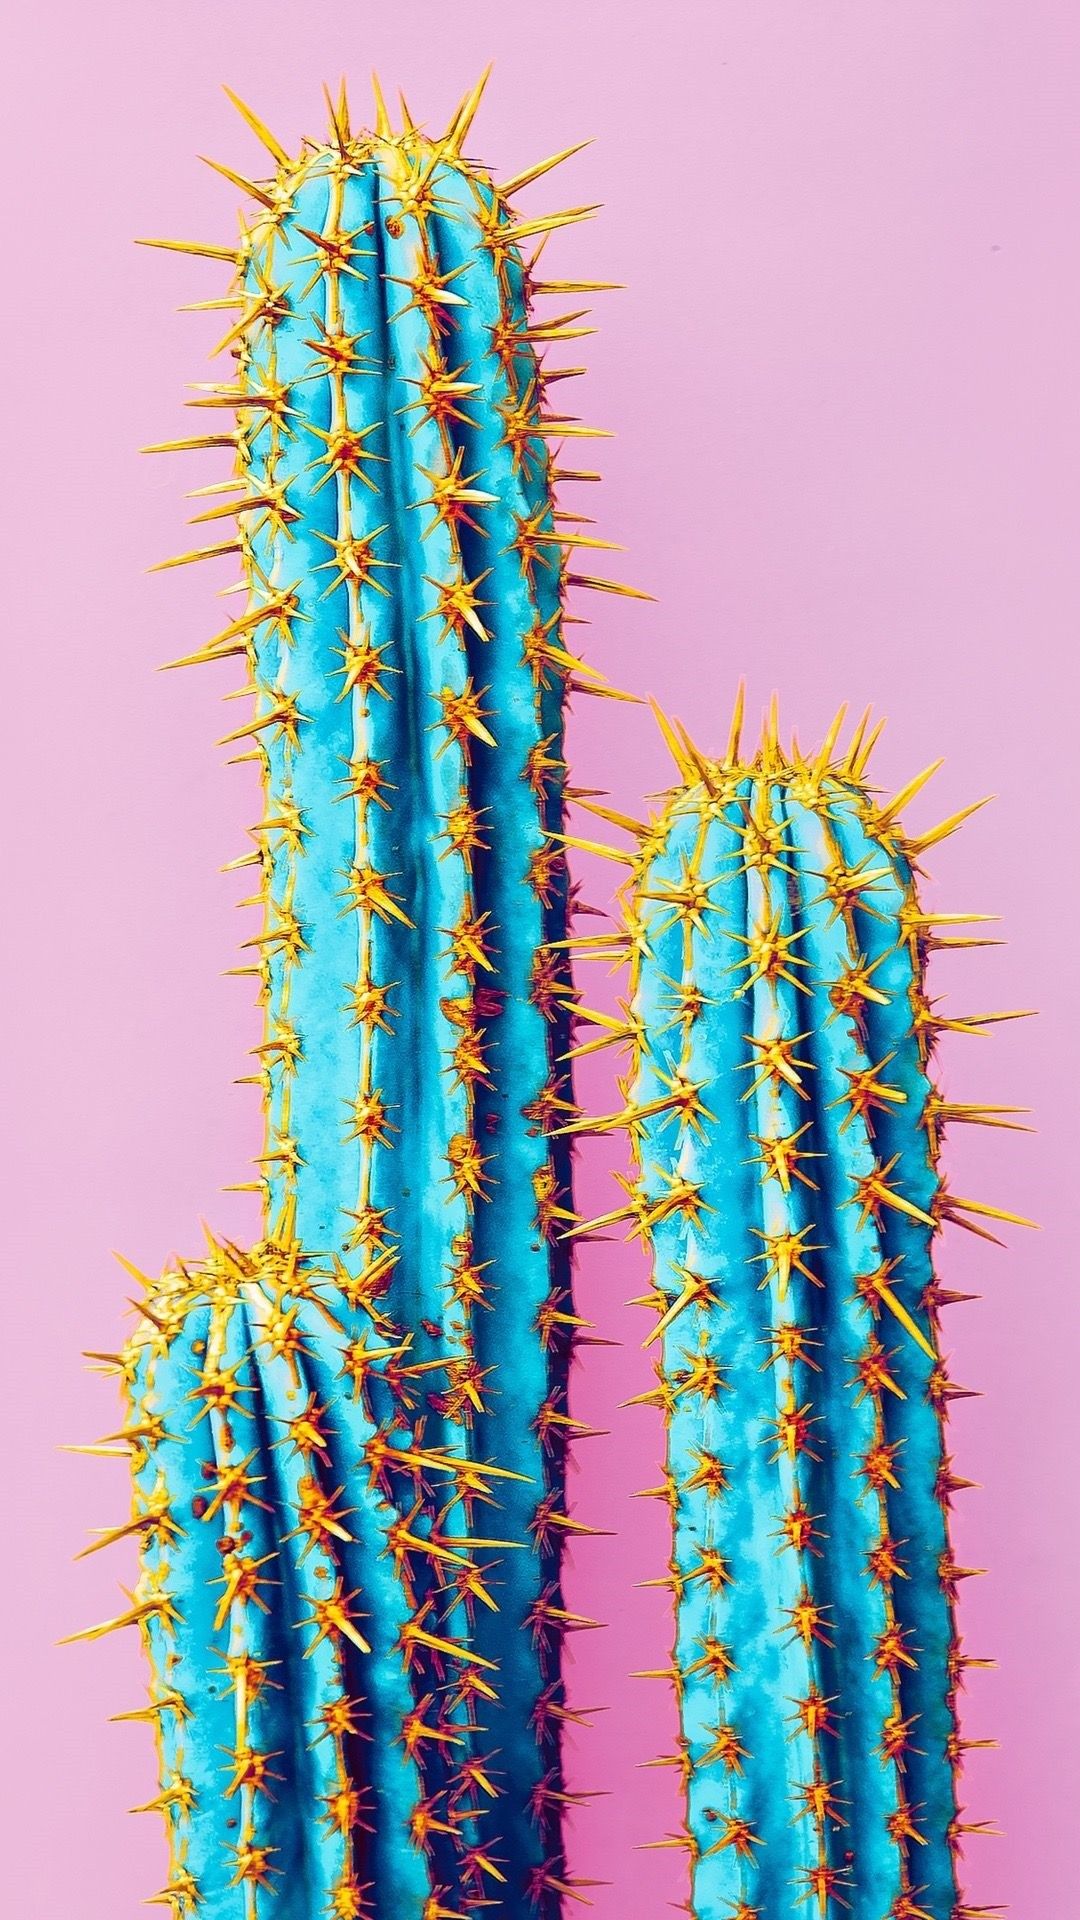 A cactus with sharp spines on top of it - Cactus